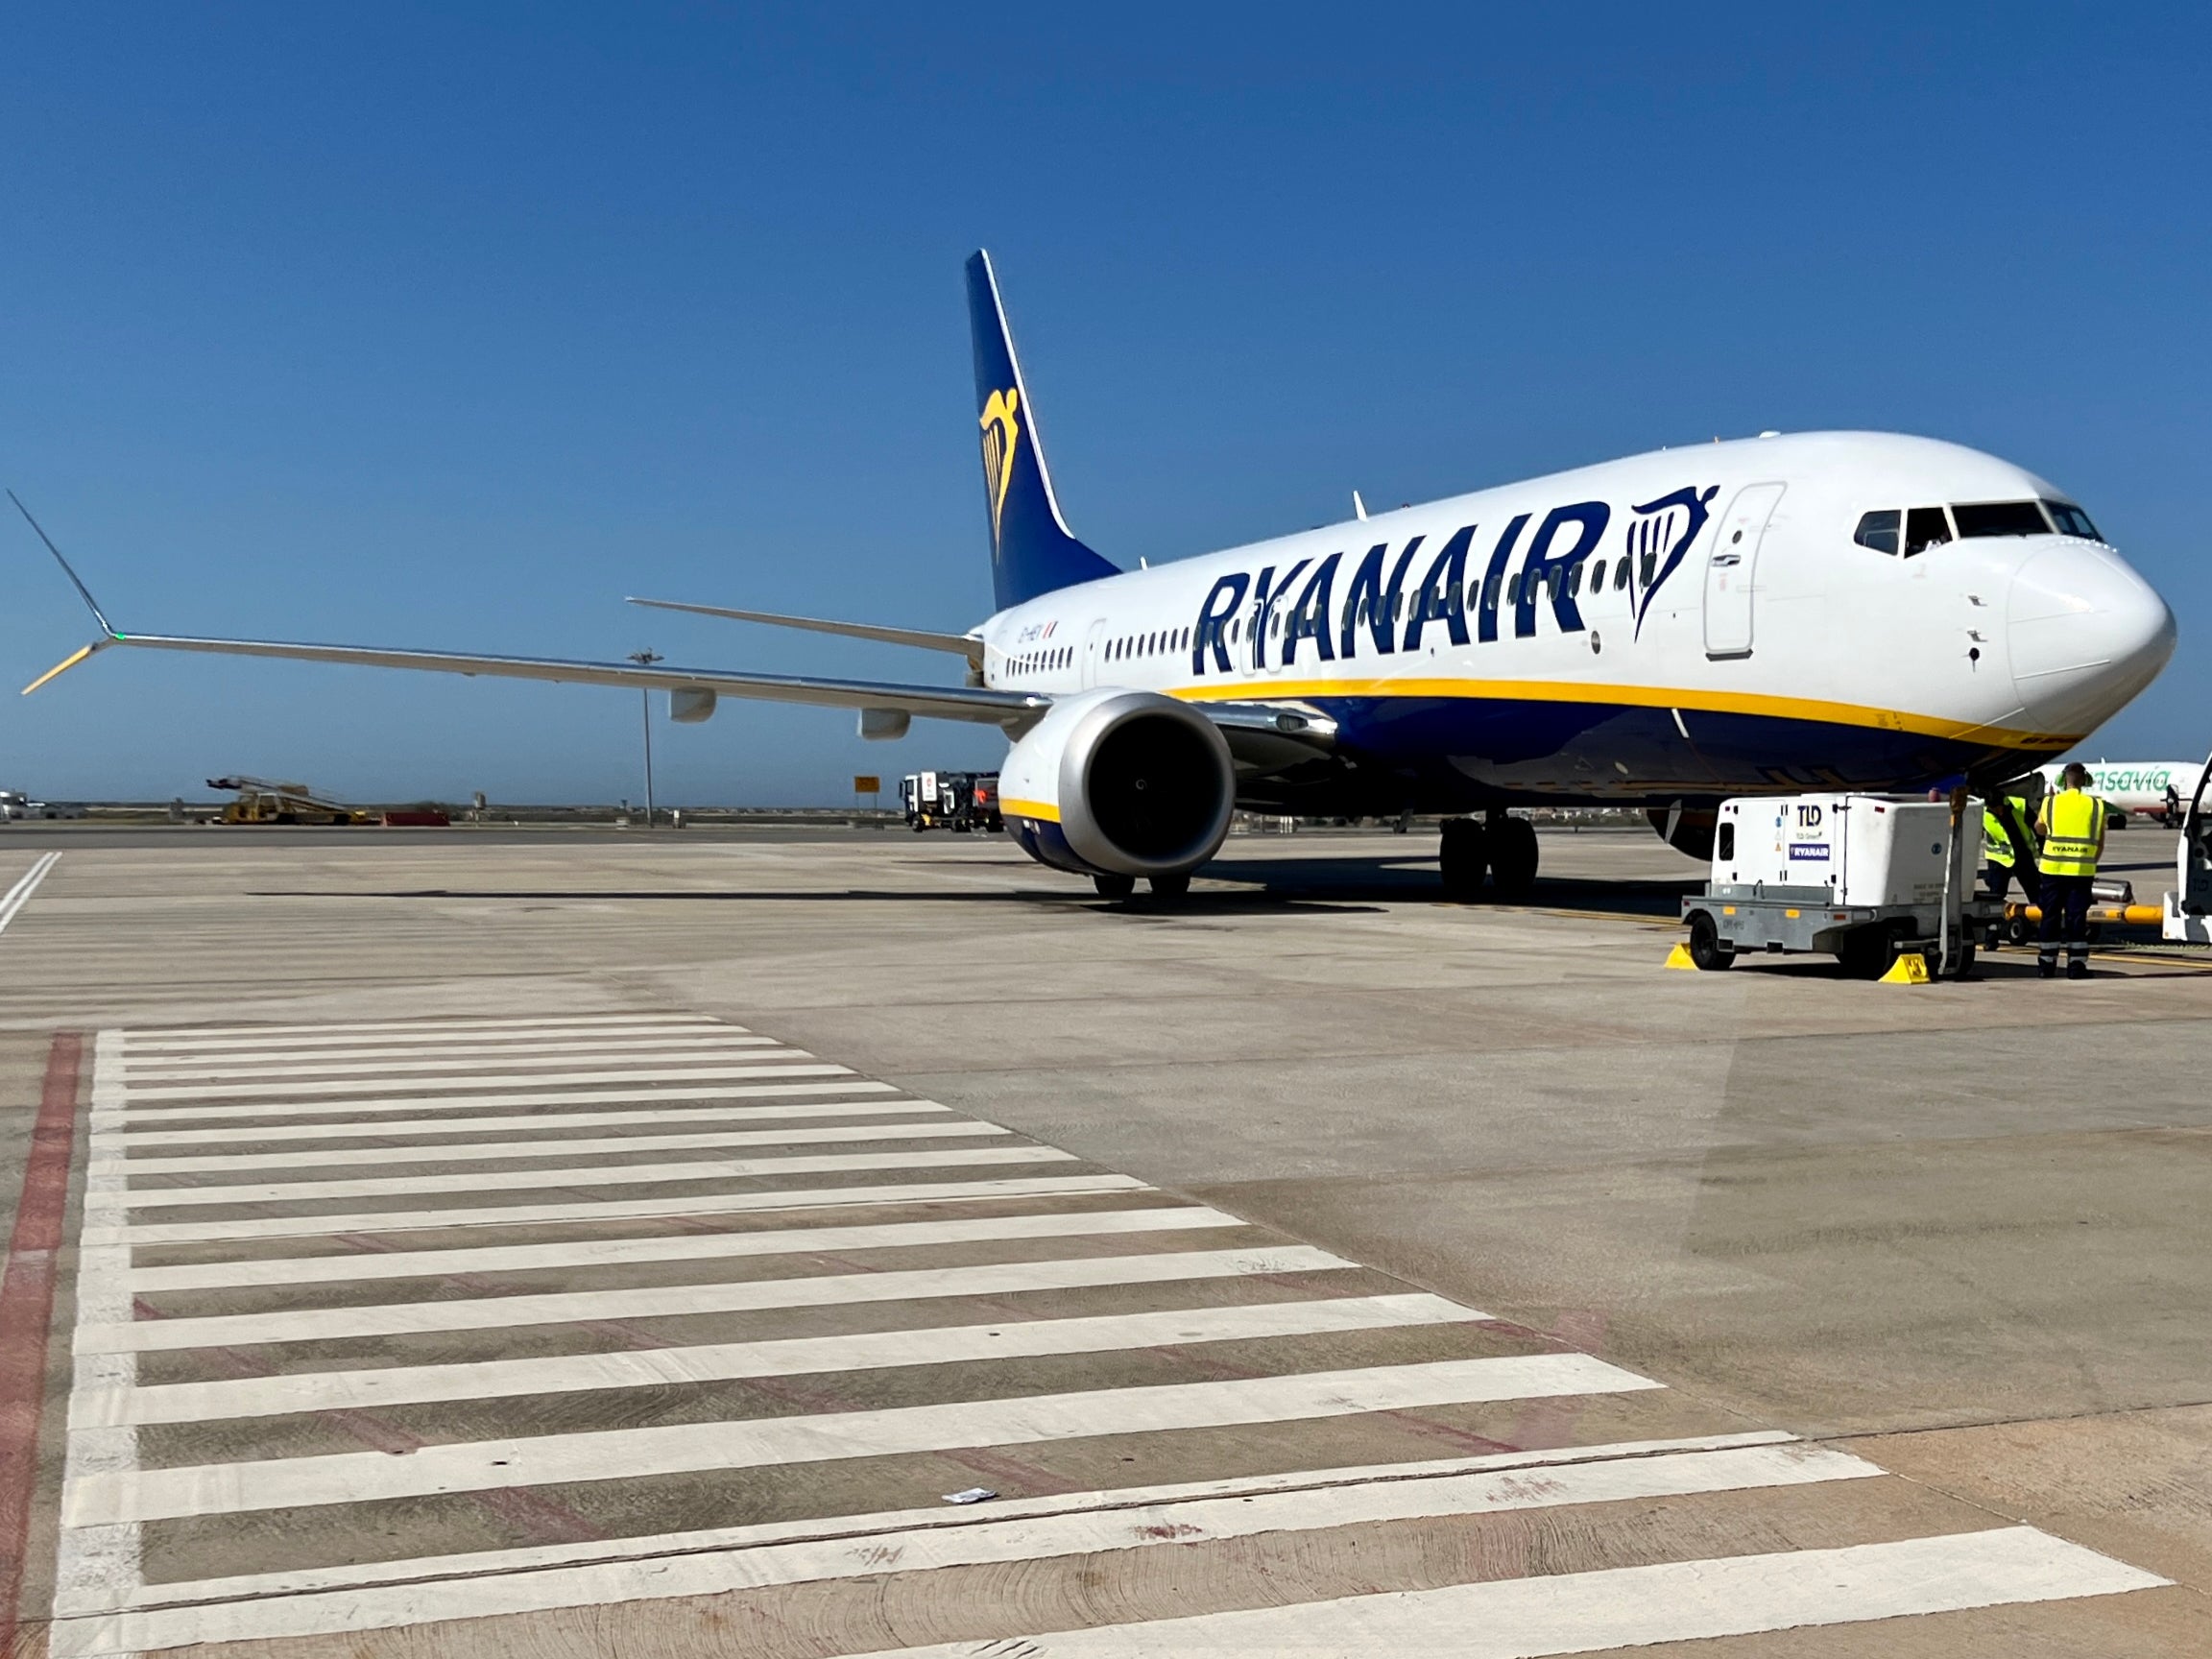 Passenger choice? Boeing 737 Max flying for Ryanair, at Faro airport in Portugal